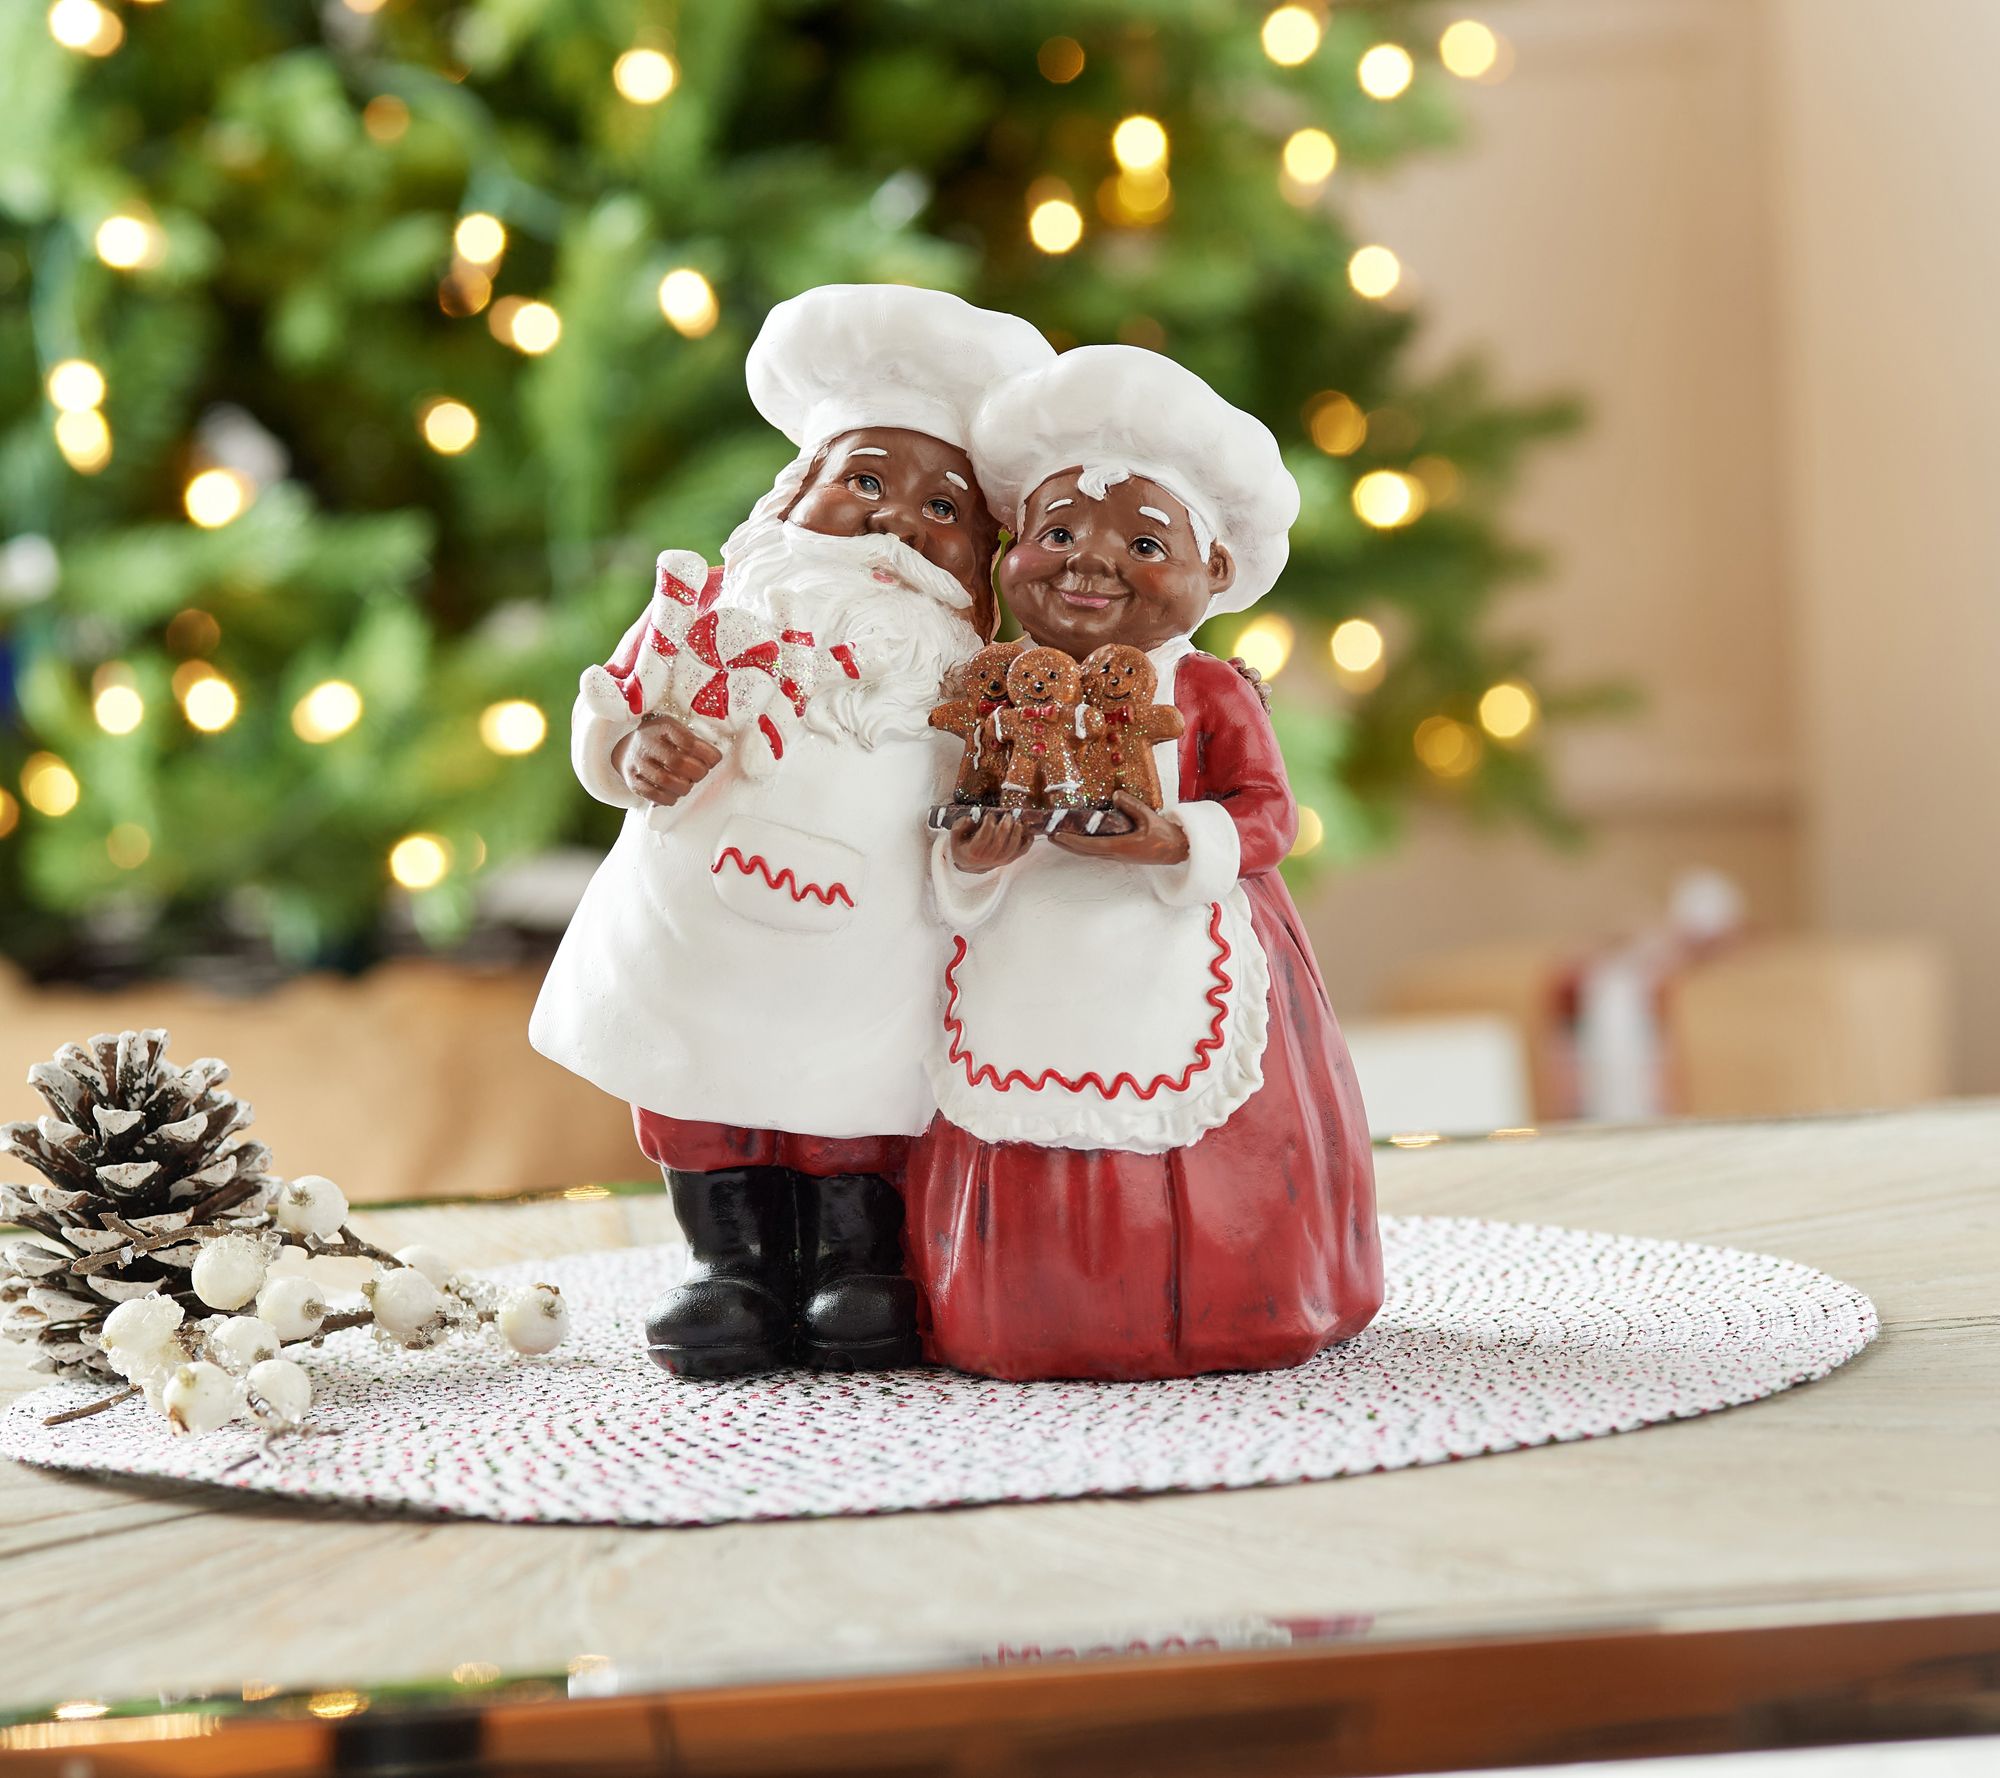 As Is" Chef Santa and Mrs. Claus with Gingerbread Treats- Valerie - QVC.com